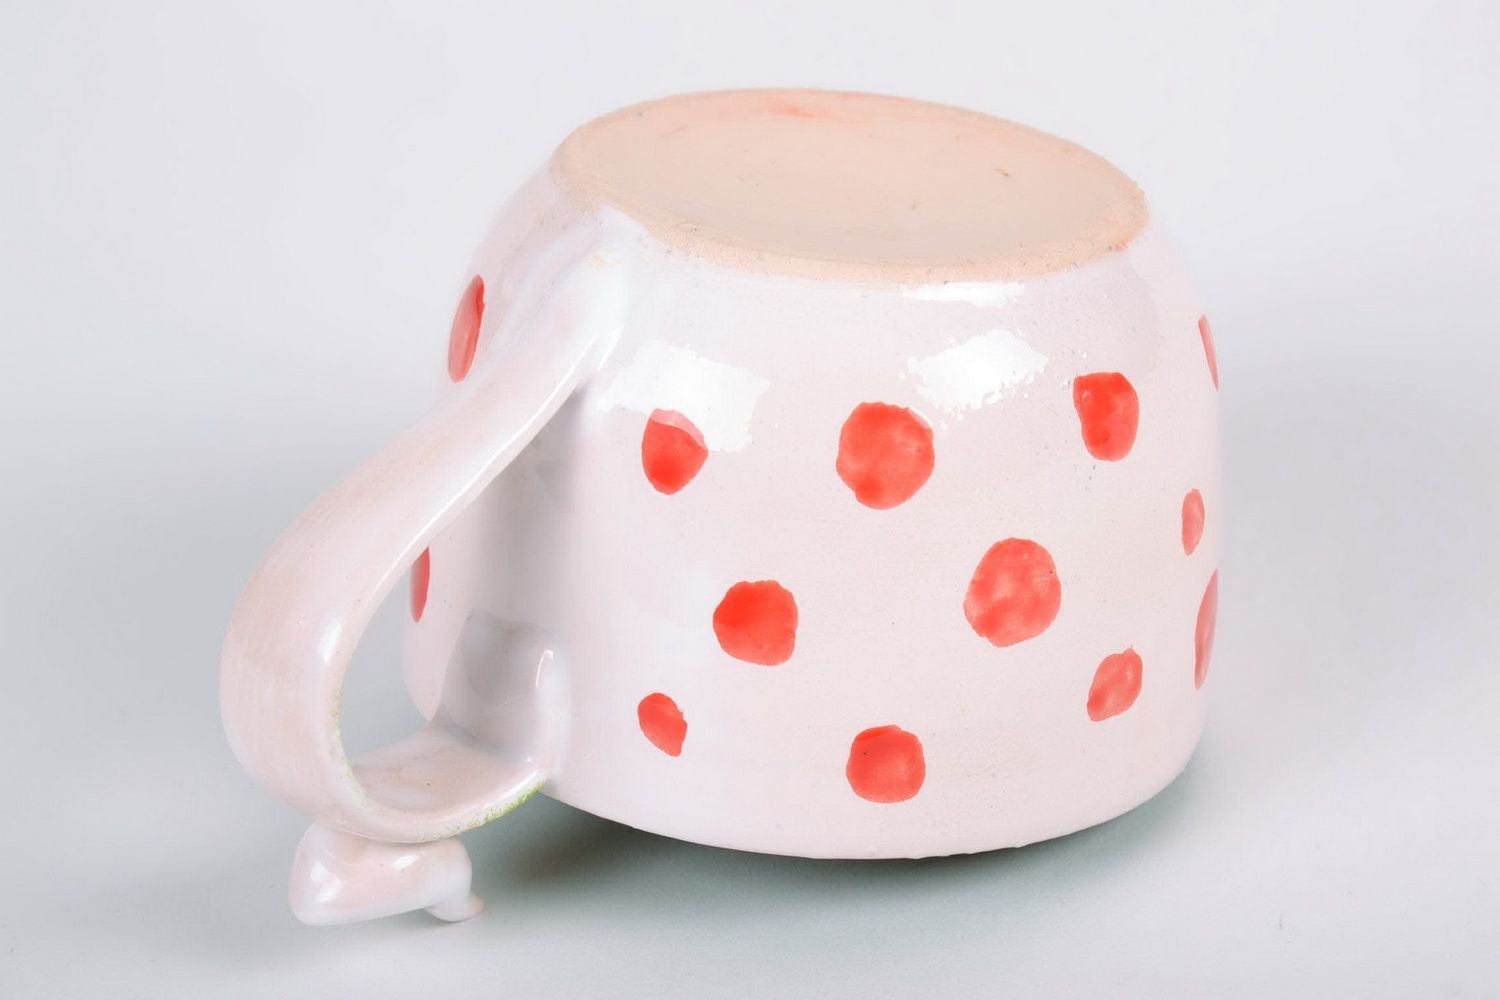 10 oz large porcelain white and lime colors drinking teacup with orange dots' pattern photo 5